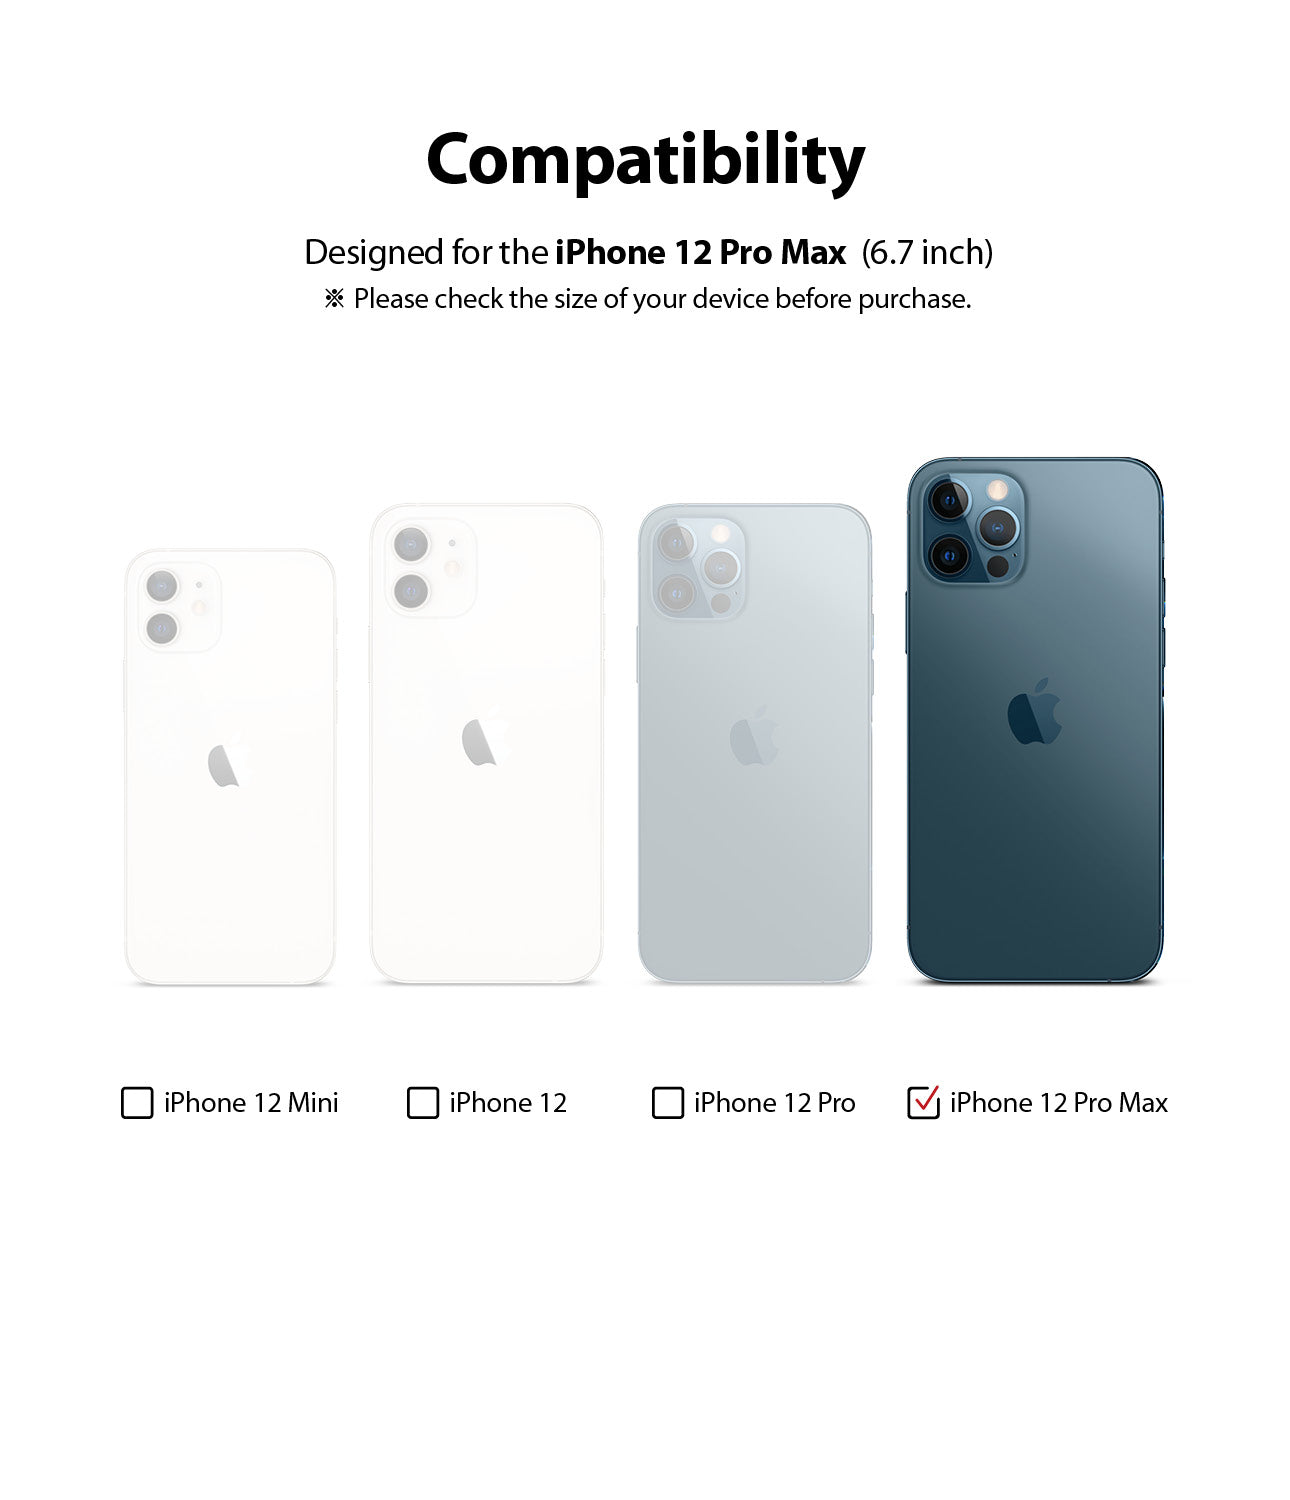 only compatible with iphone 12 pro max